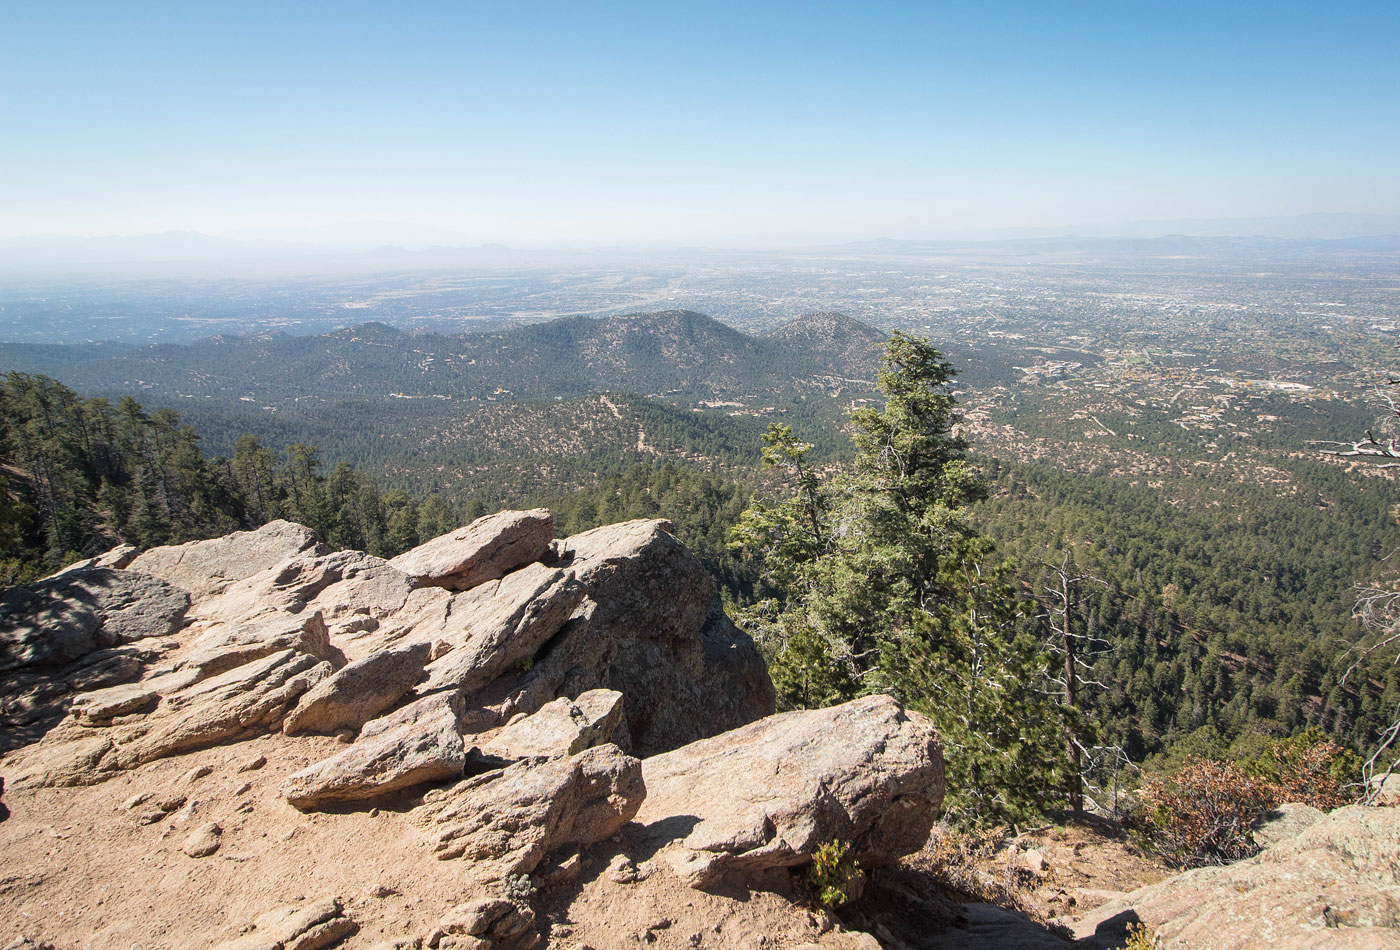 Hike Atalaya Mountain in Santa Fe National Forest, New Mexico - Stav is Lost